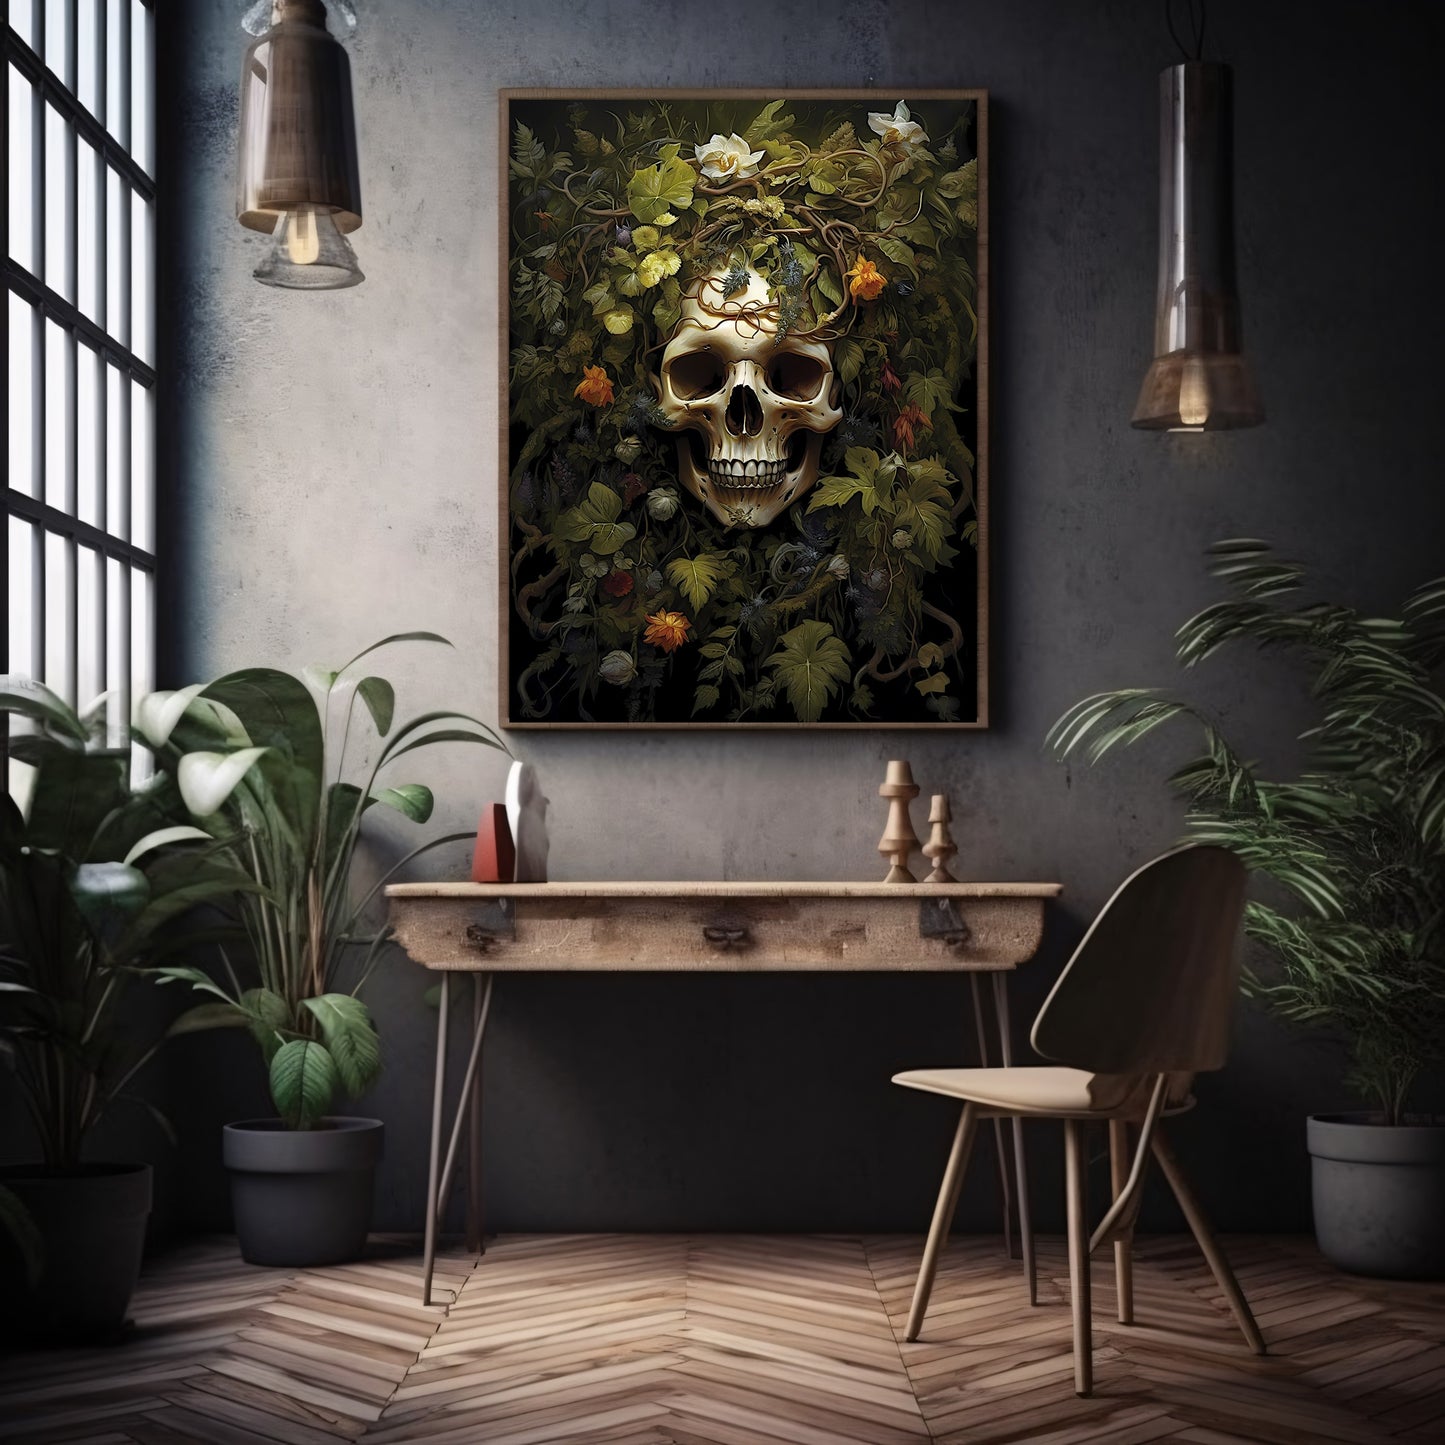 Gothic Floral Skull Gothic Wall Art Vintage Poster Art Poster Print Home Decor Victorian Painting Dark Cottagecore Flowers Skeleton Paper Poster Print